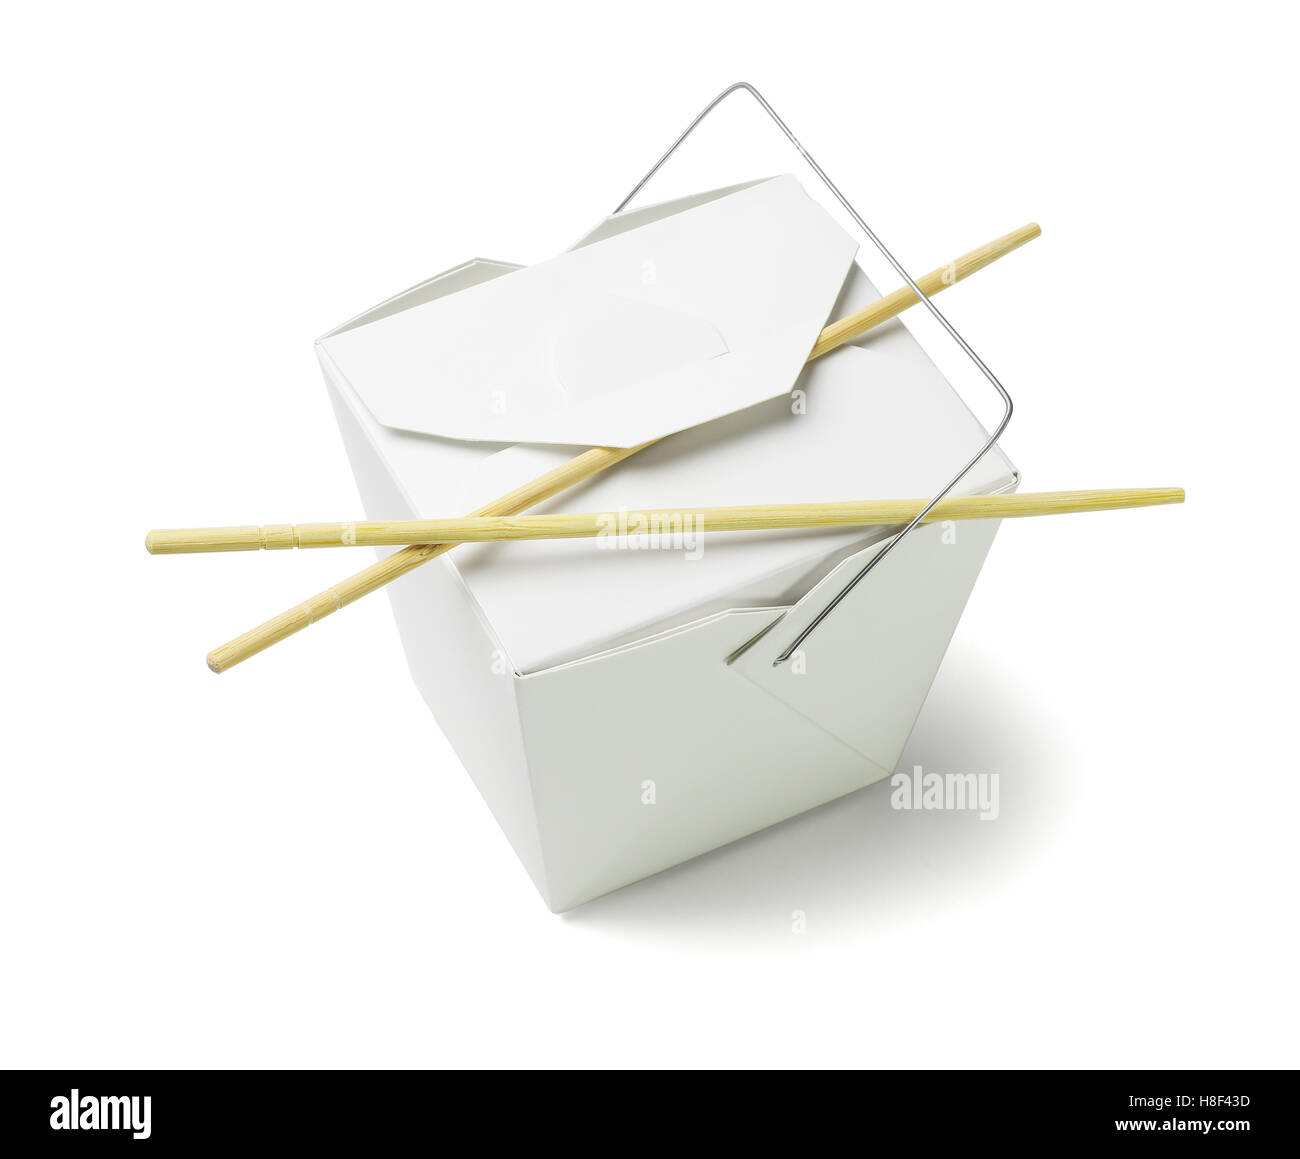 Chinese Restaurant Takeaway Food Container with Chopsticks on White Background Stock Photo